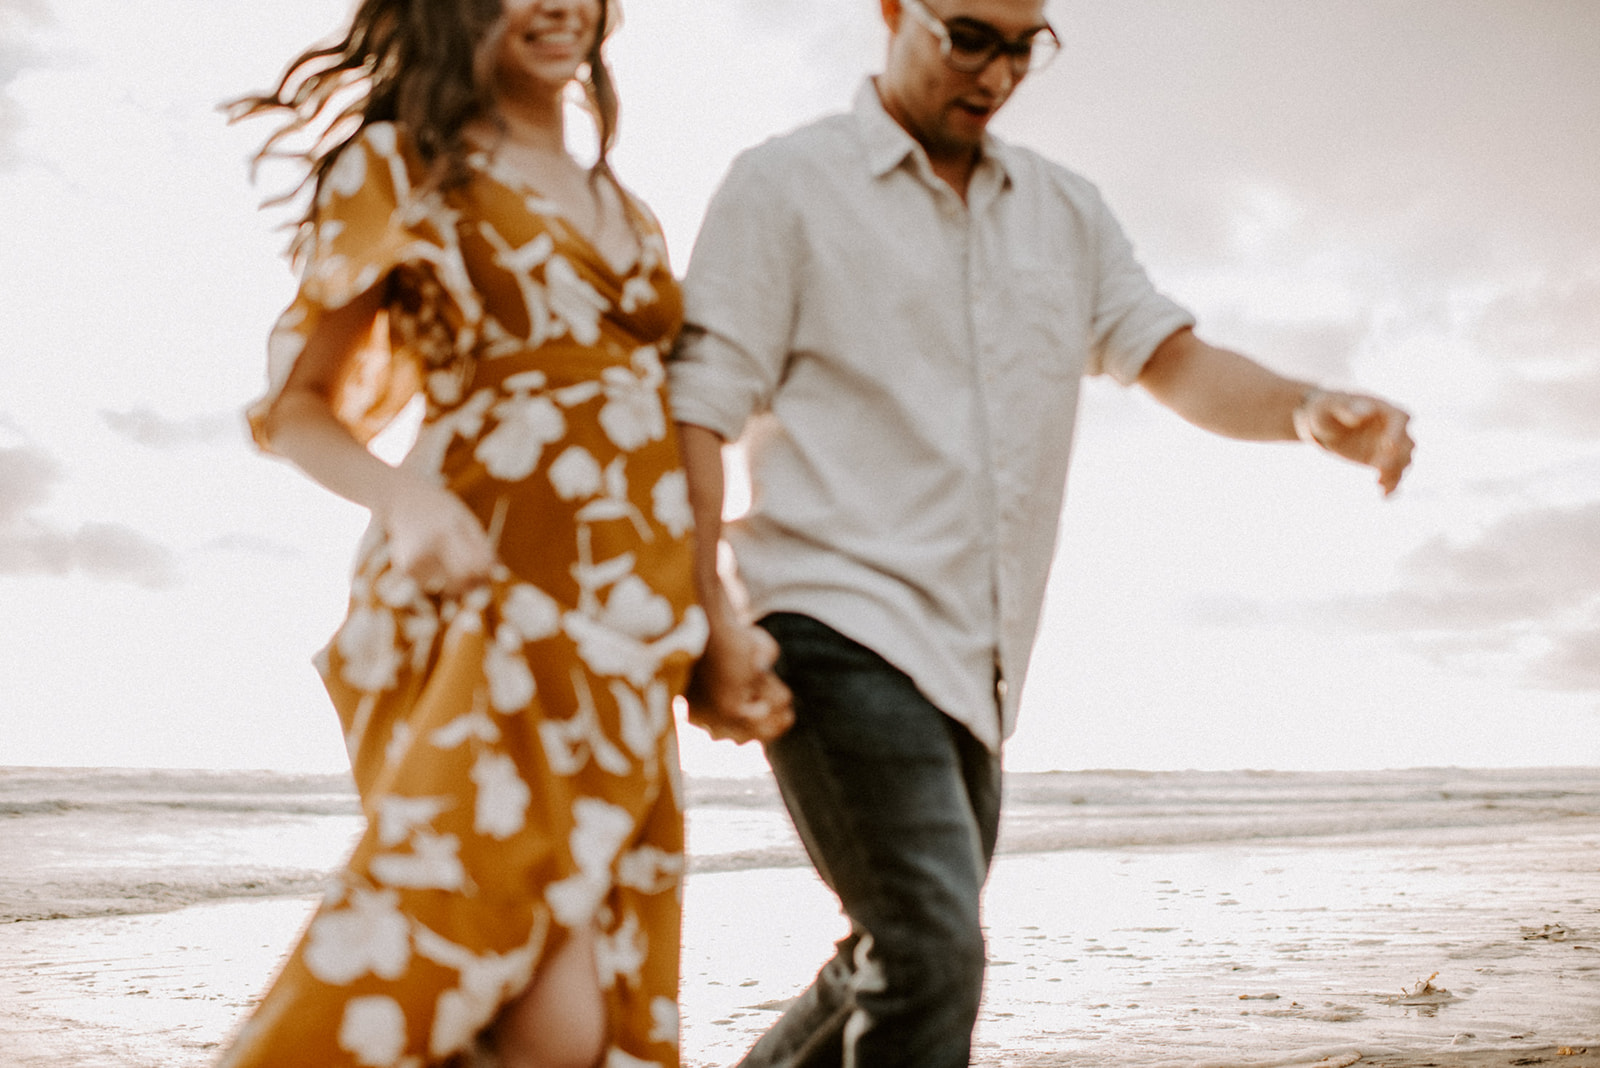 SoCal San Diego Sunny Beach Engagement Session